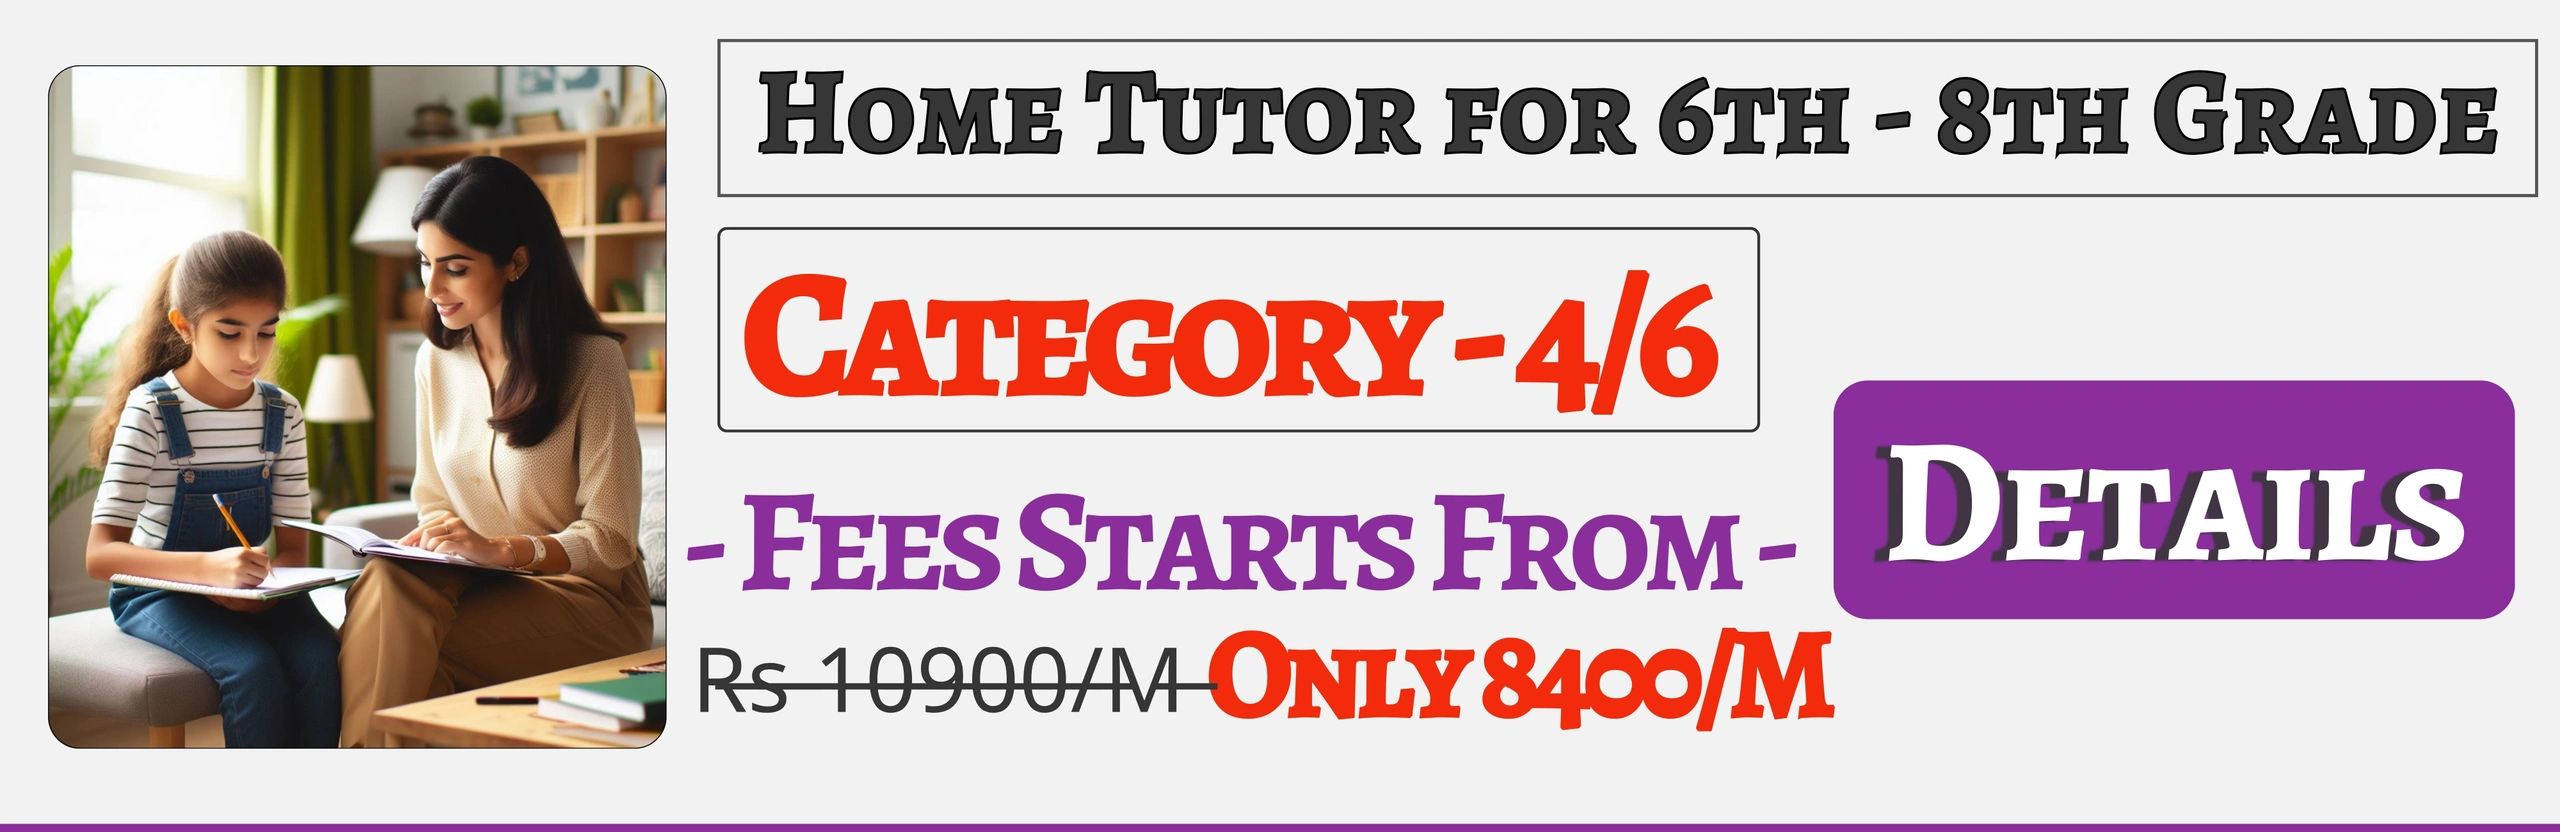 Book Best Home Tuition Tutors For 6th 7th & 8th In Jaipur Fees Only 8400/M